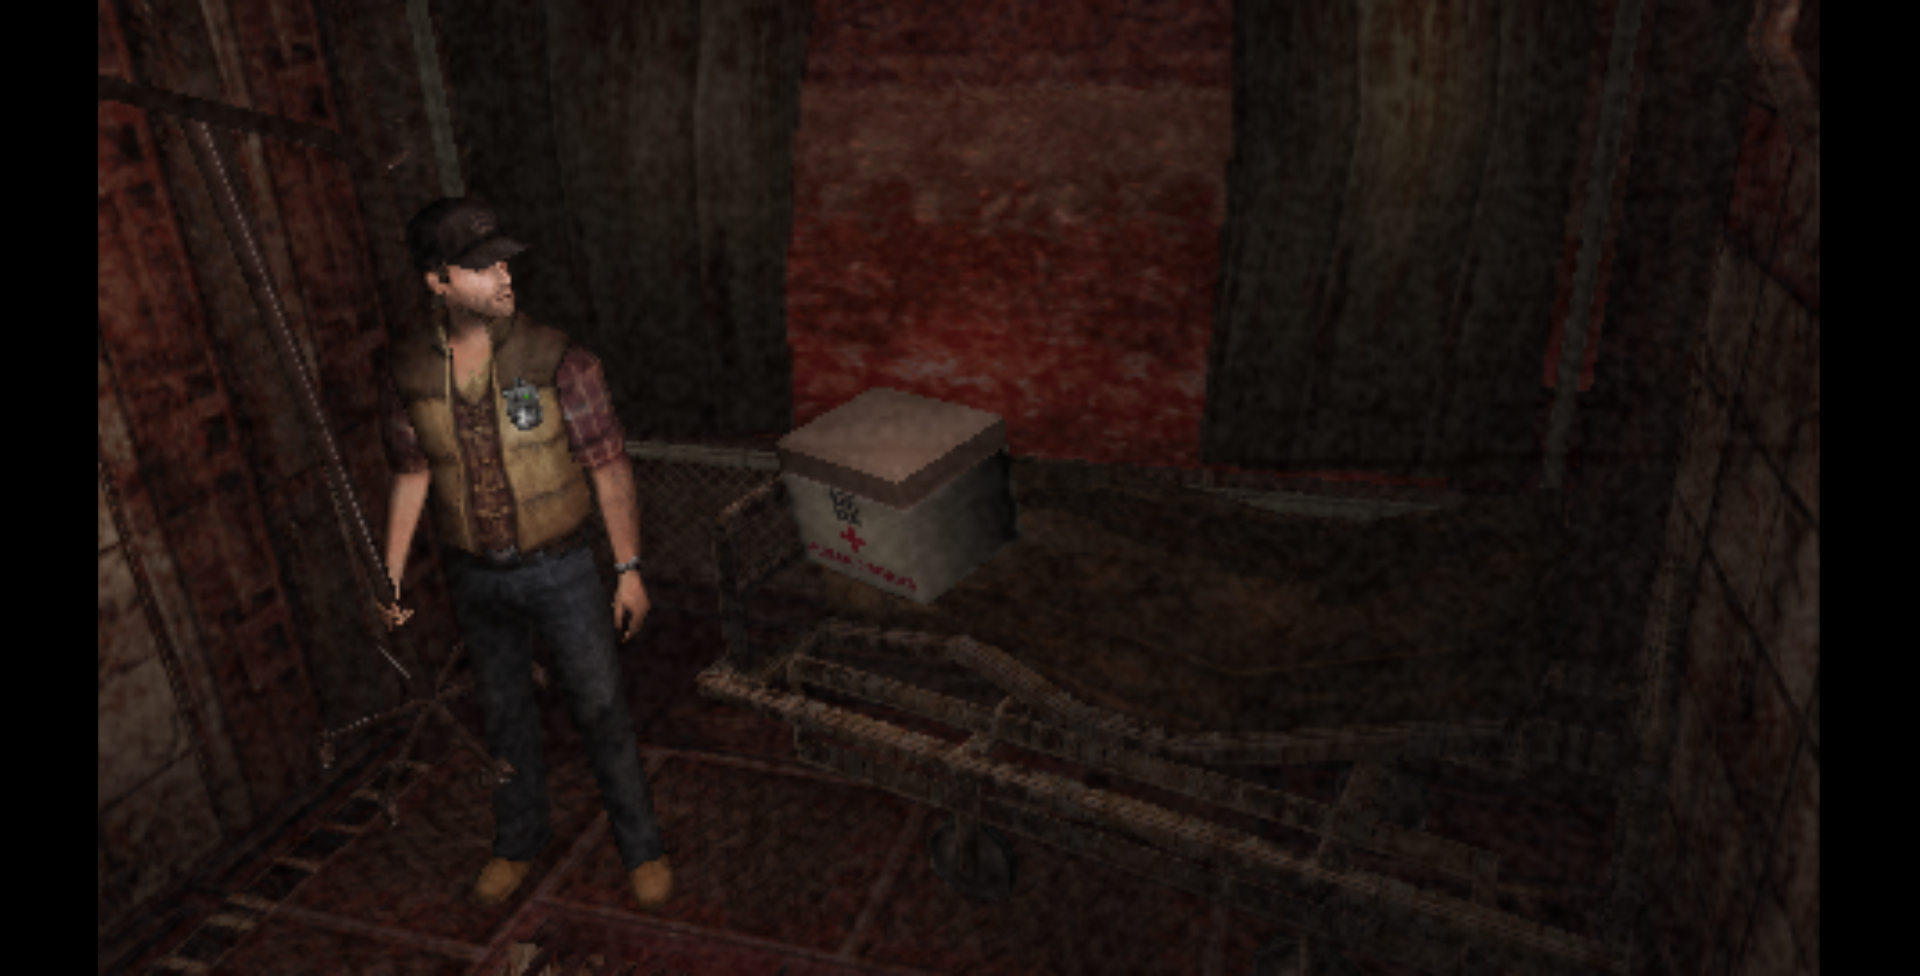 Playing Silent Hill 3 - Silent Hill Memories